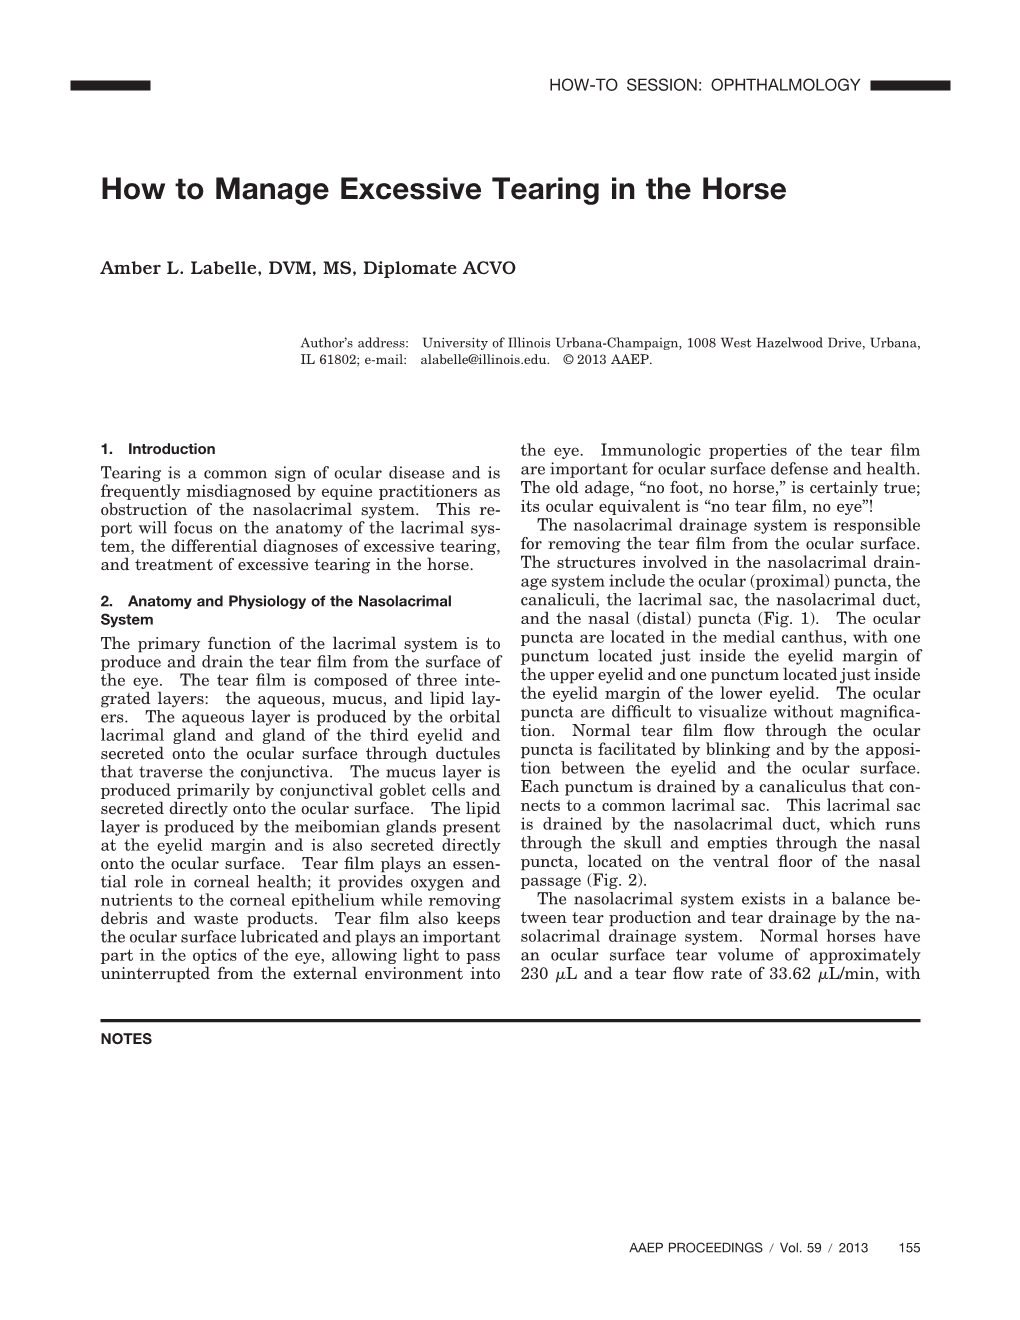 How to Manage Excessive Tearing in the Horse